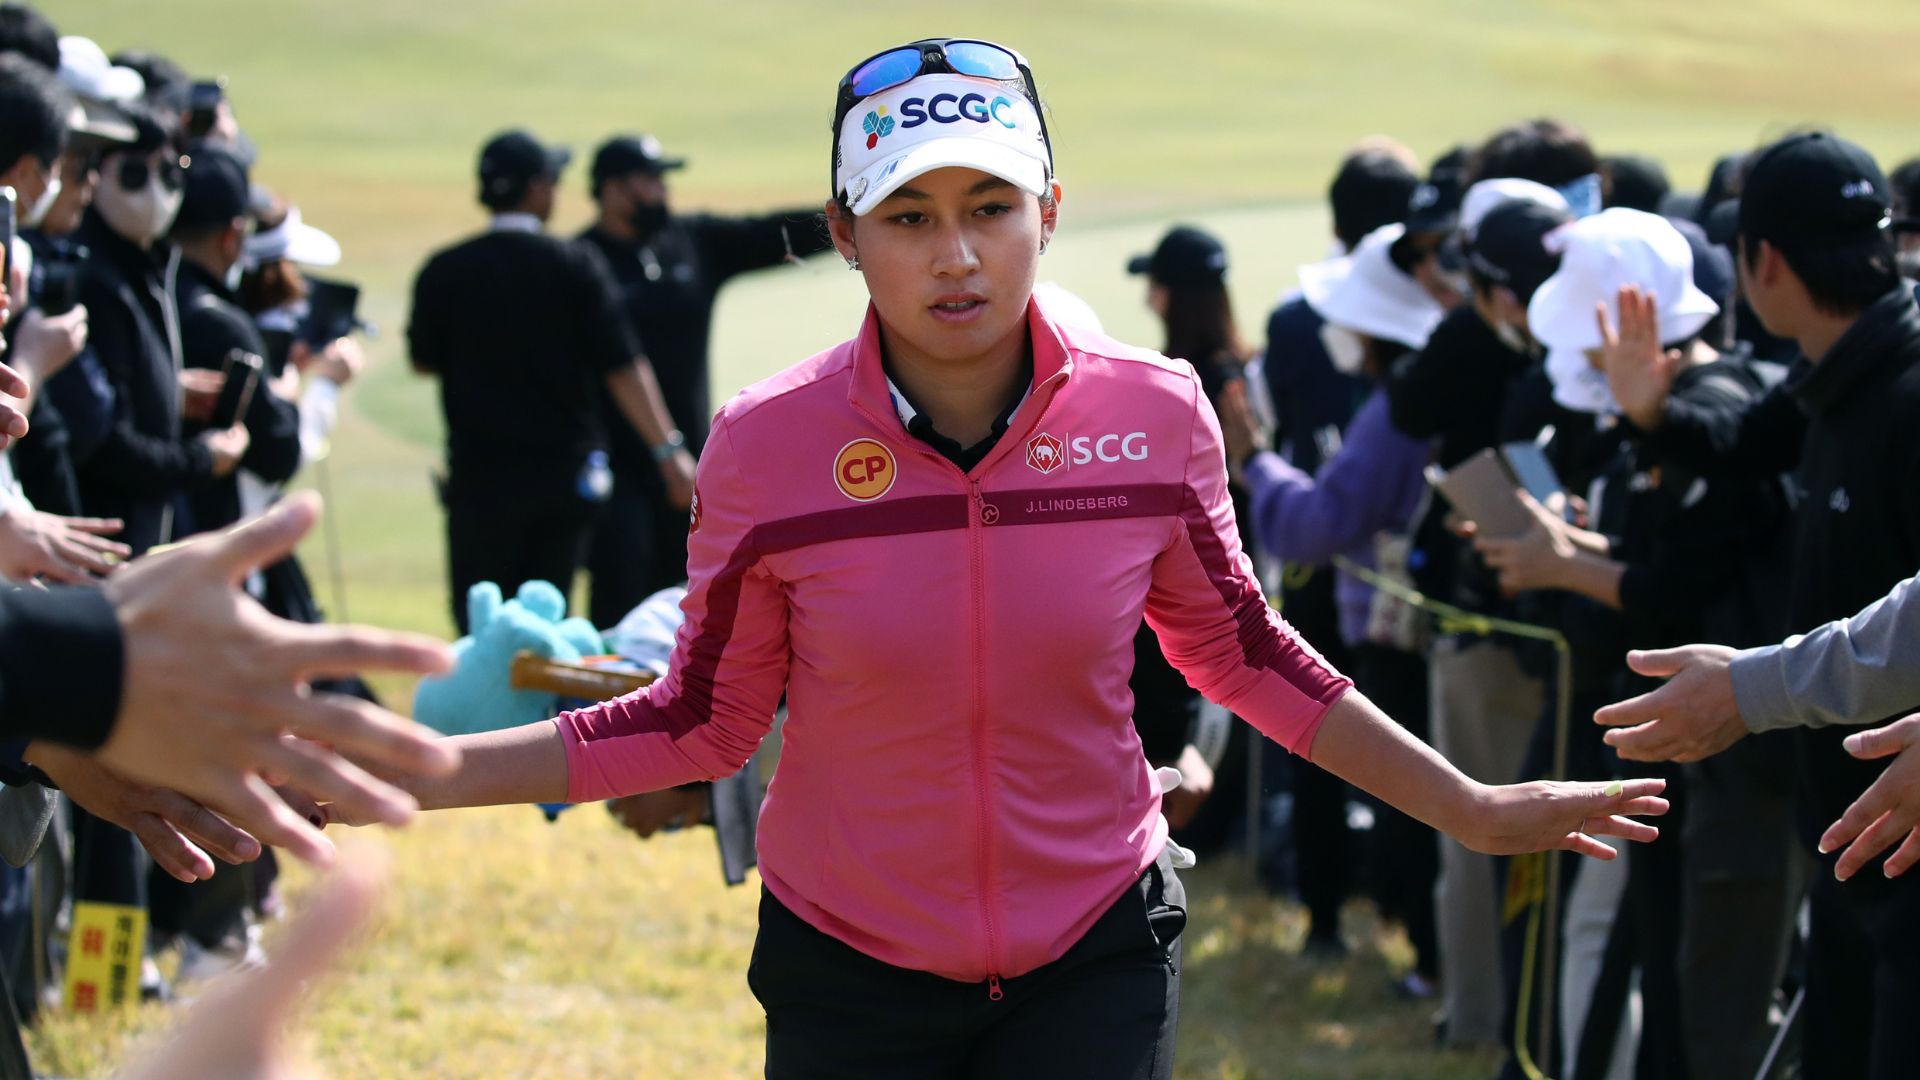 Atthaya Thitikul still ‘satisfied’ after missing out on much with Sunday 74 at BMW Ladies Championship